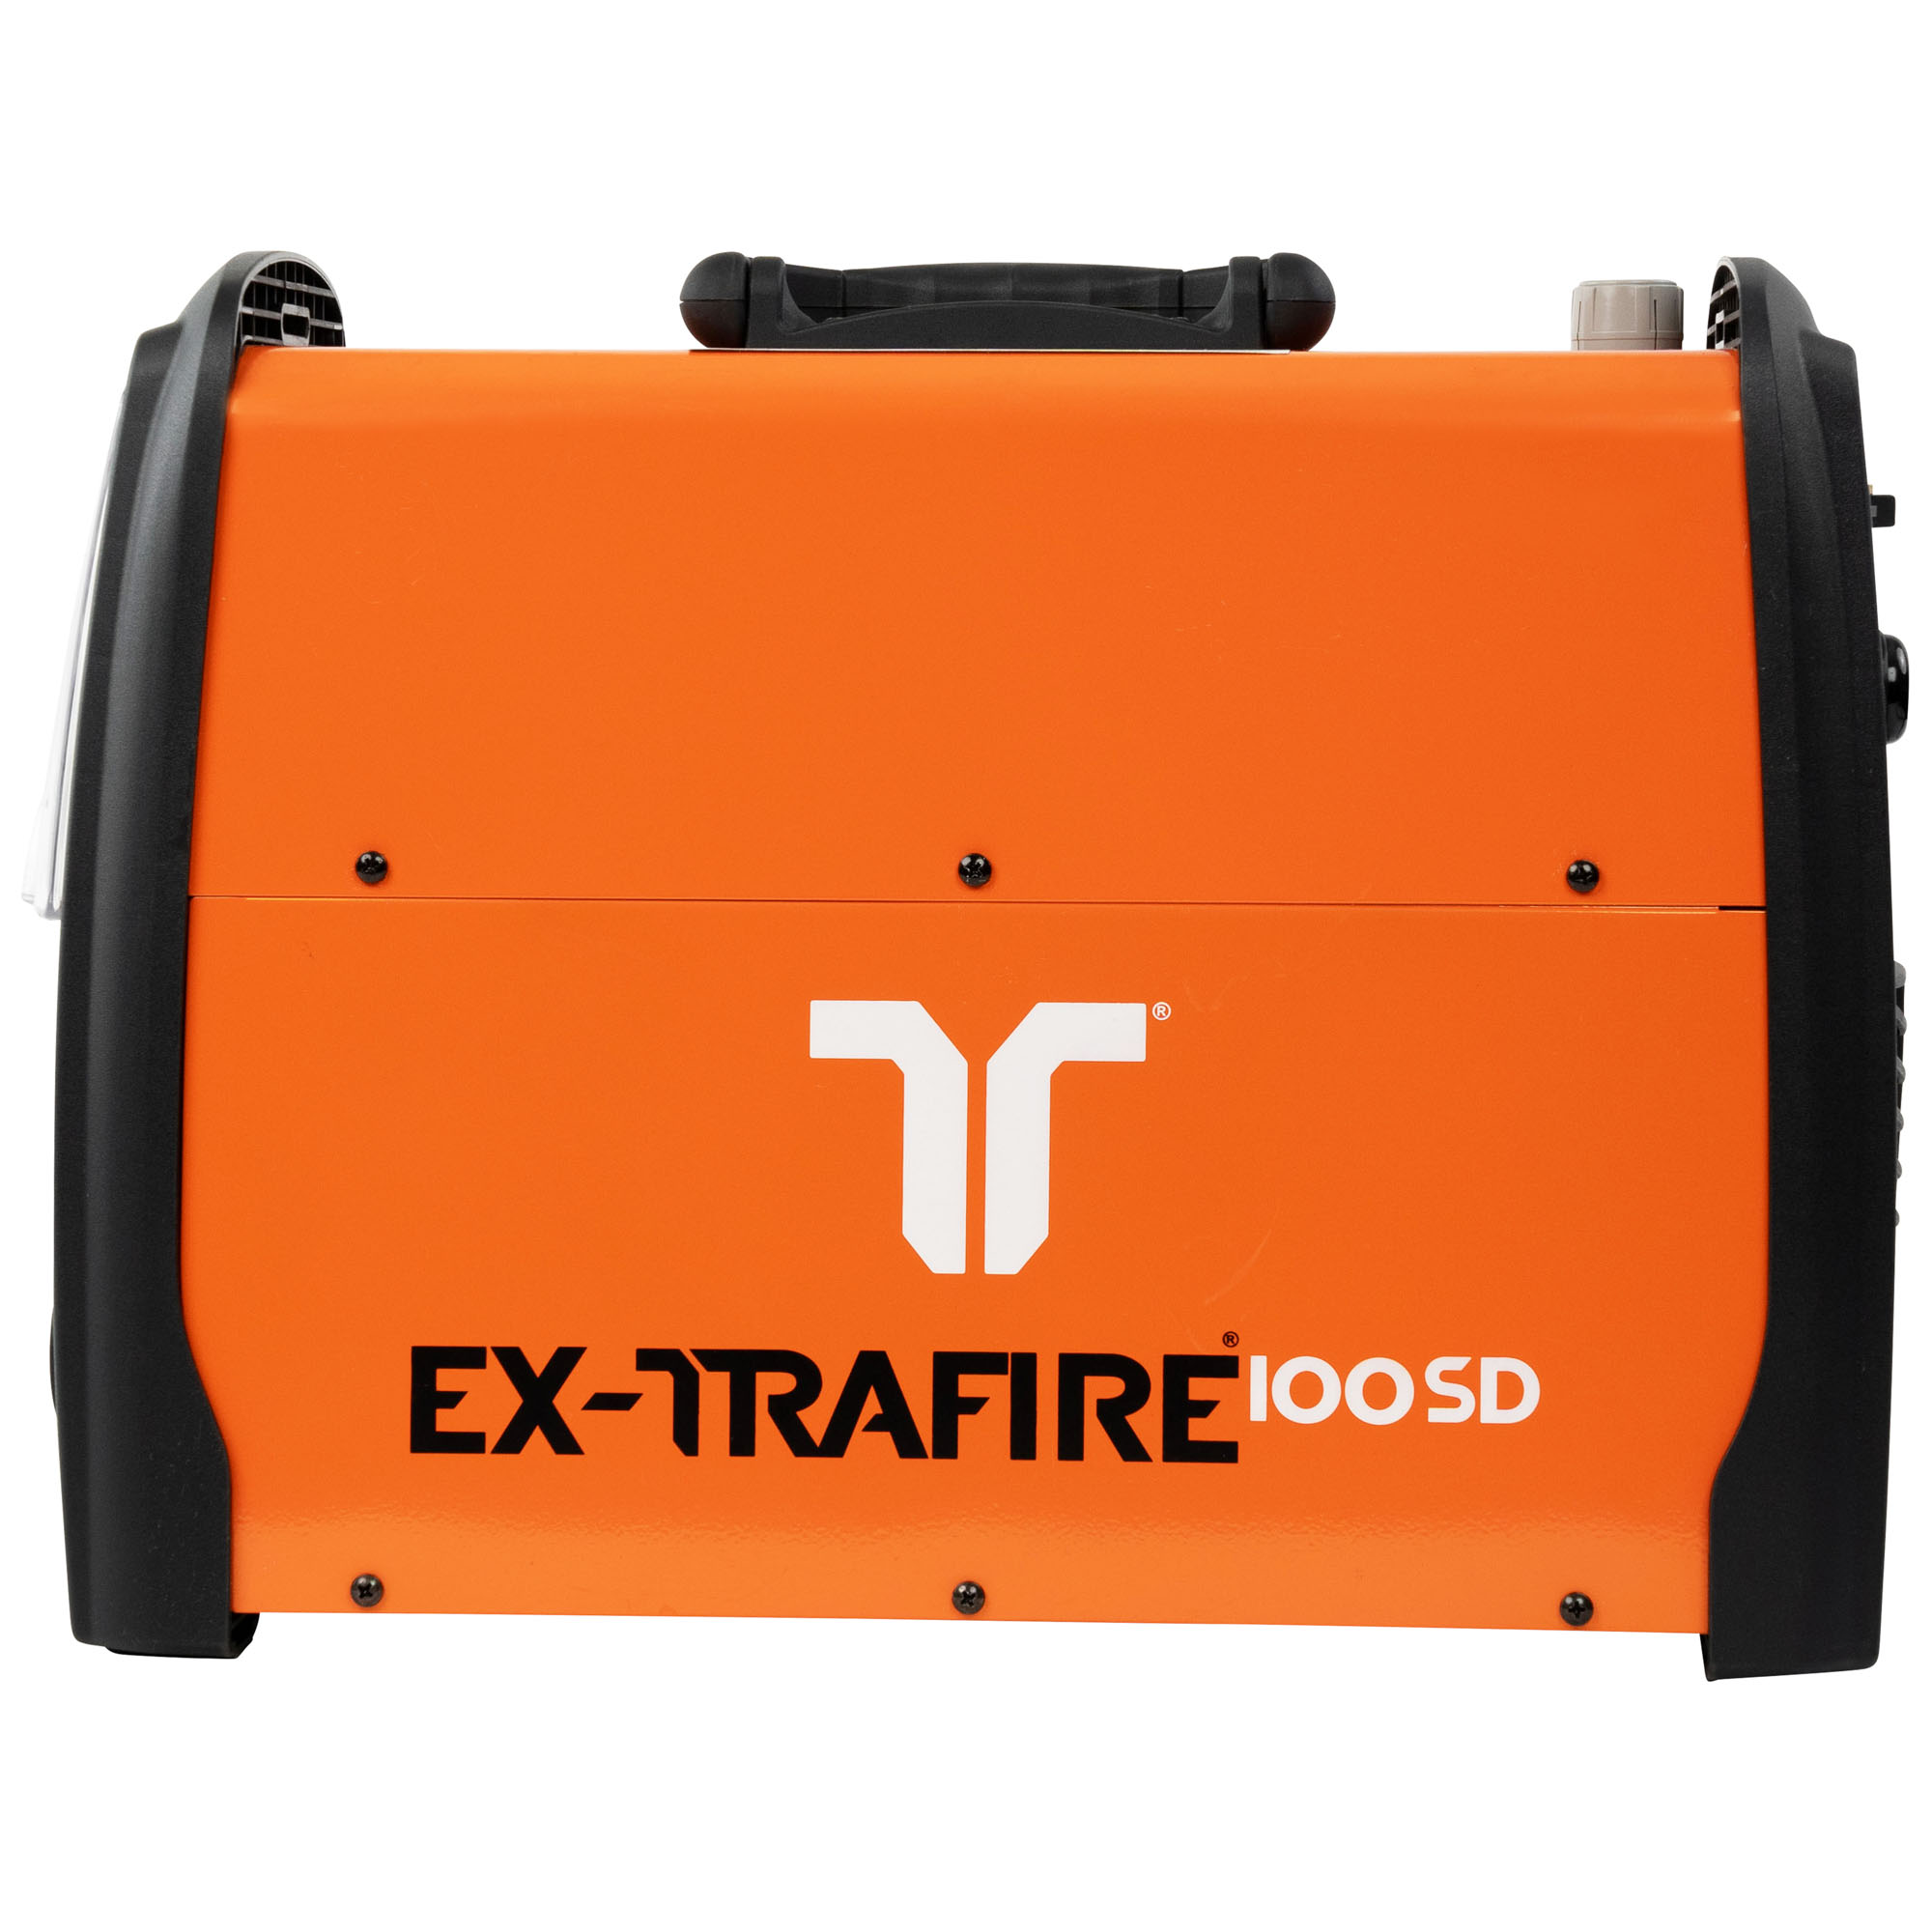 Thermacut EX-TRAFIRE 100SD / Hand System / 8m Brenner / Starter-Kit